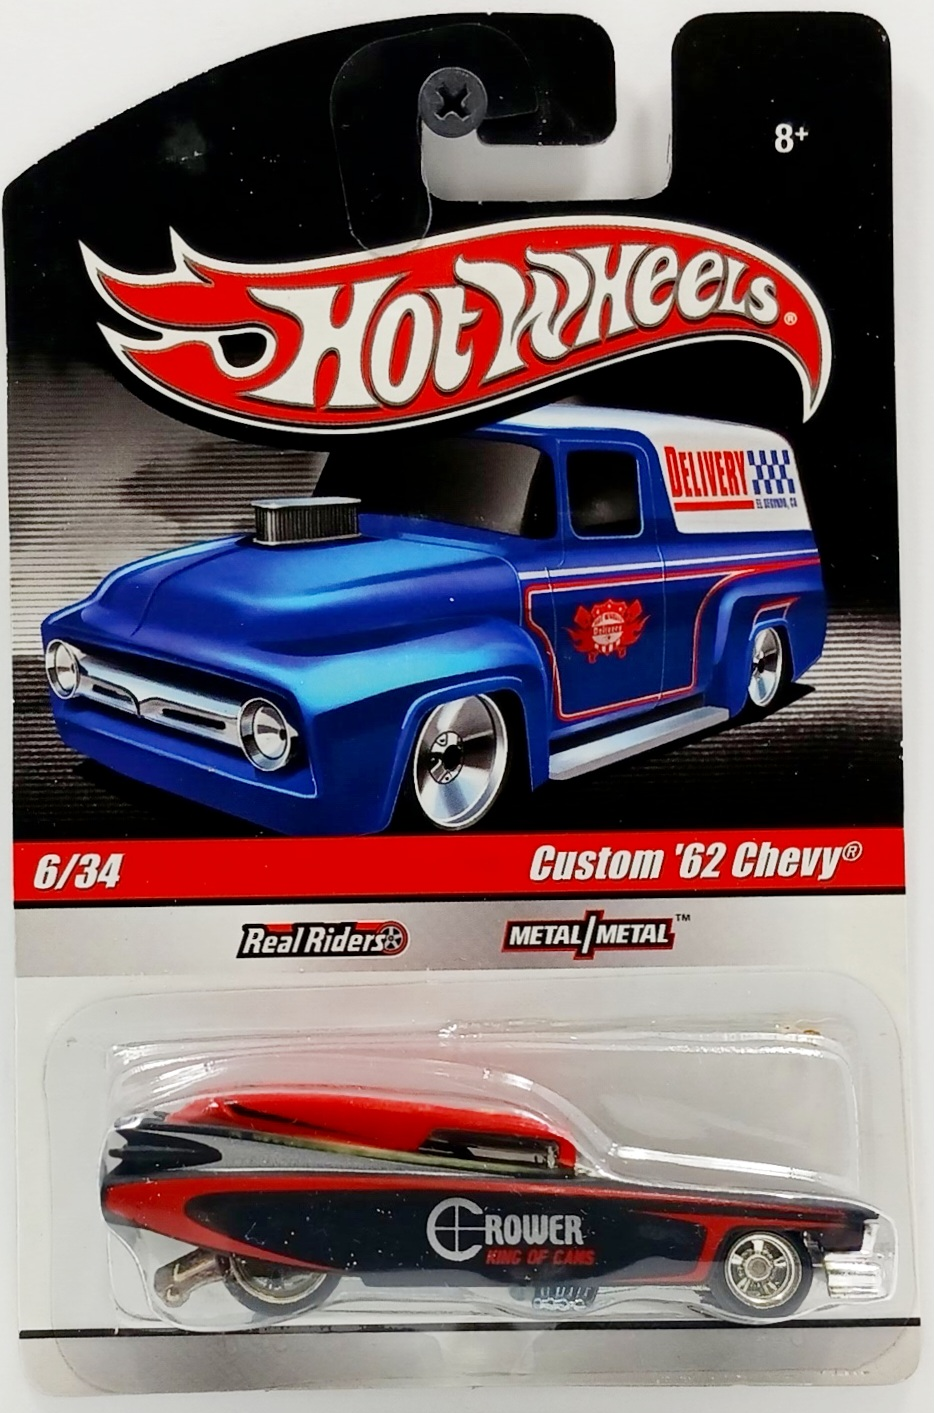 Hot Wheels 2010 - Delivery / Slick Rides 7/34 - '59 Cadillac Funny Car - Green & Silver / Crower Cams - Metal/Metal & Real Riders